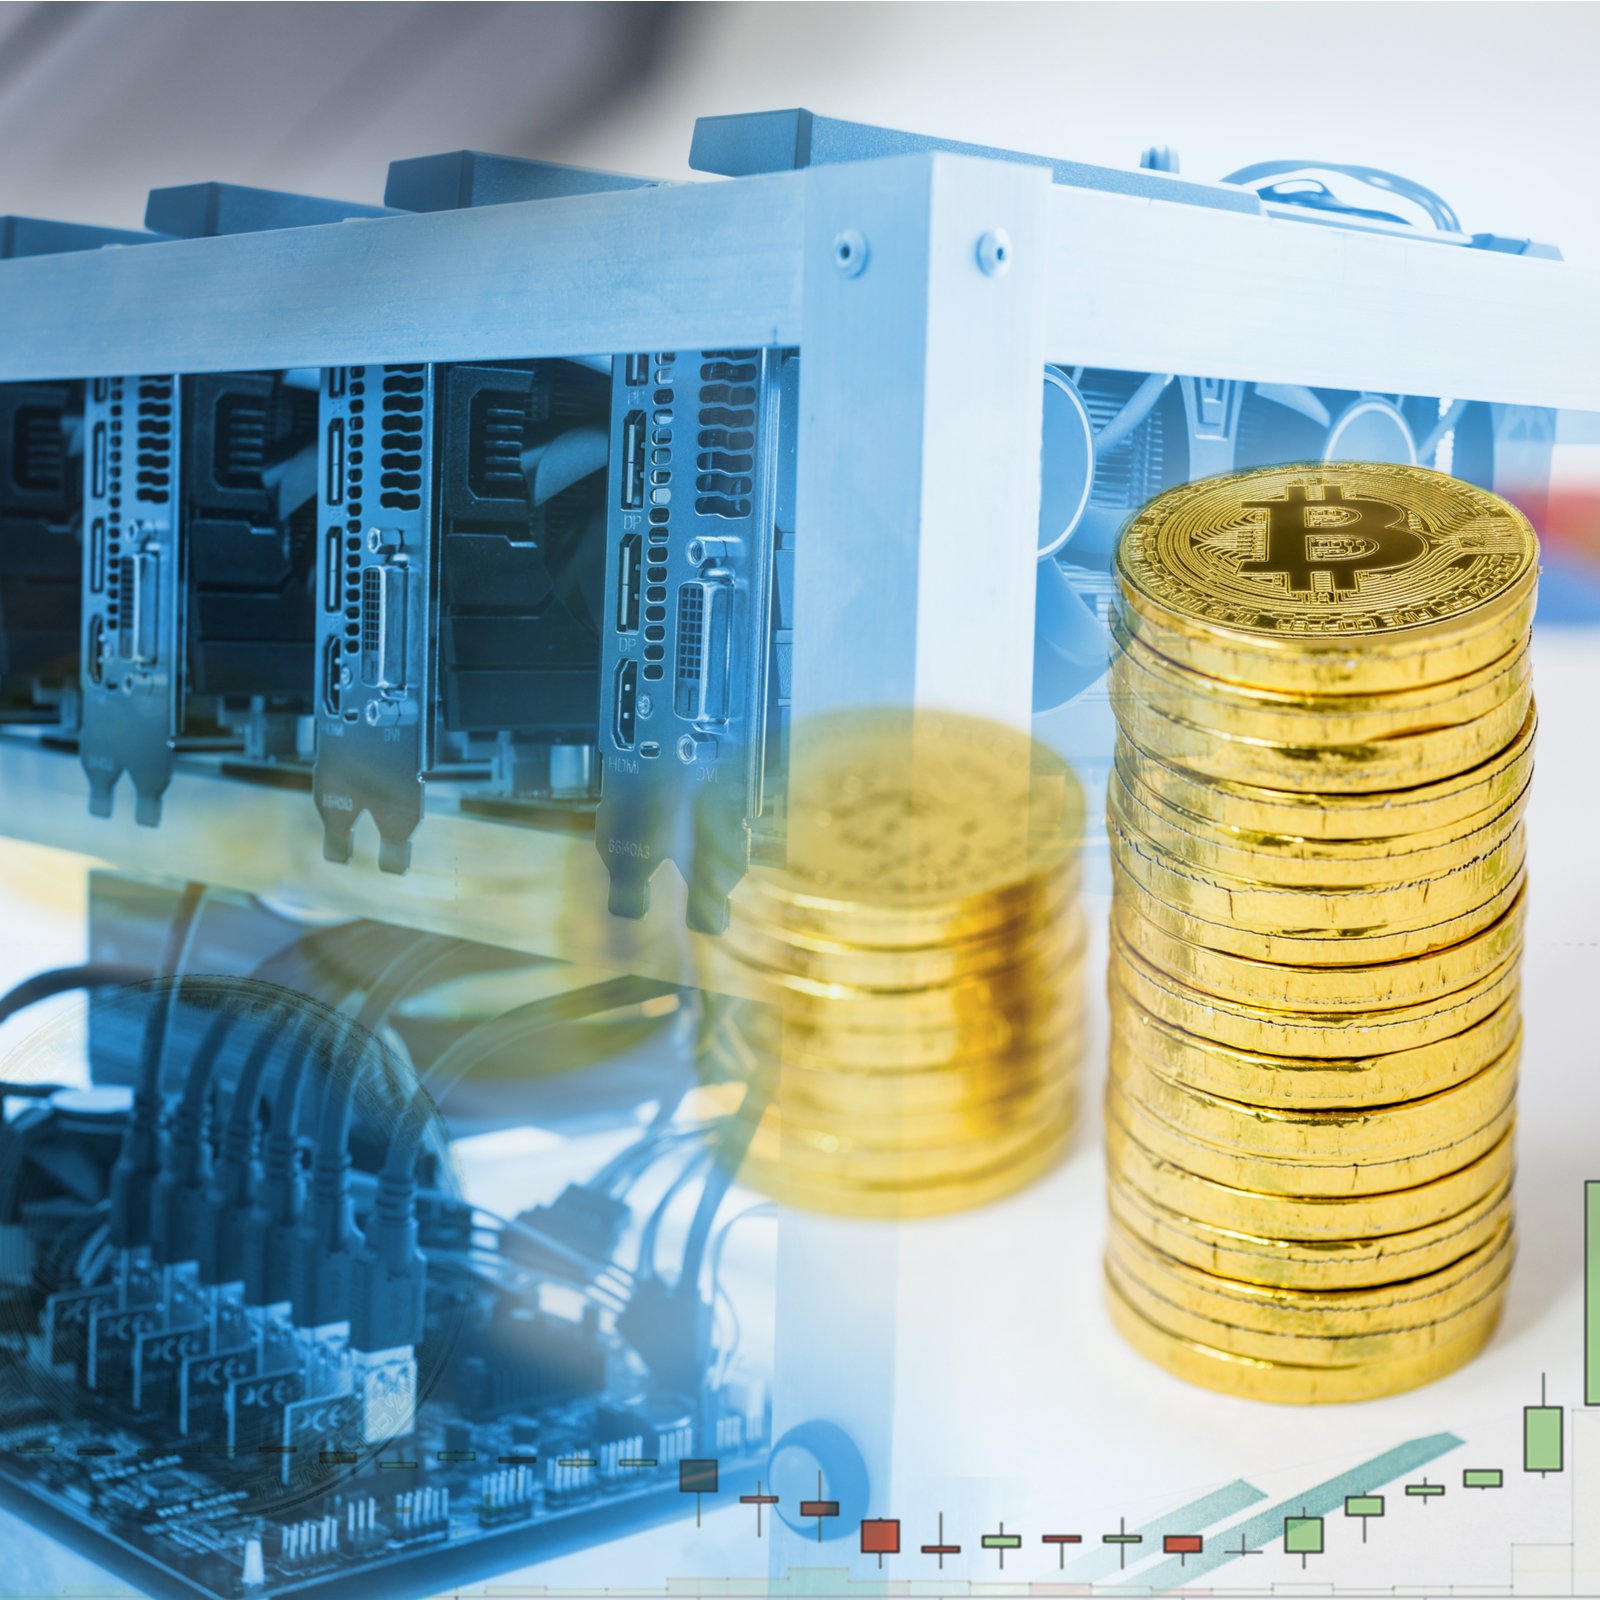 Confusion Grows Surrounding Official Chinese Position Regarding Bitcoin Mining